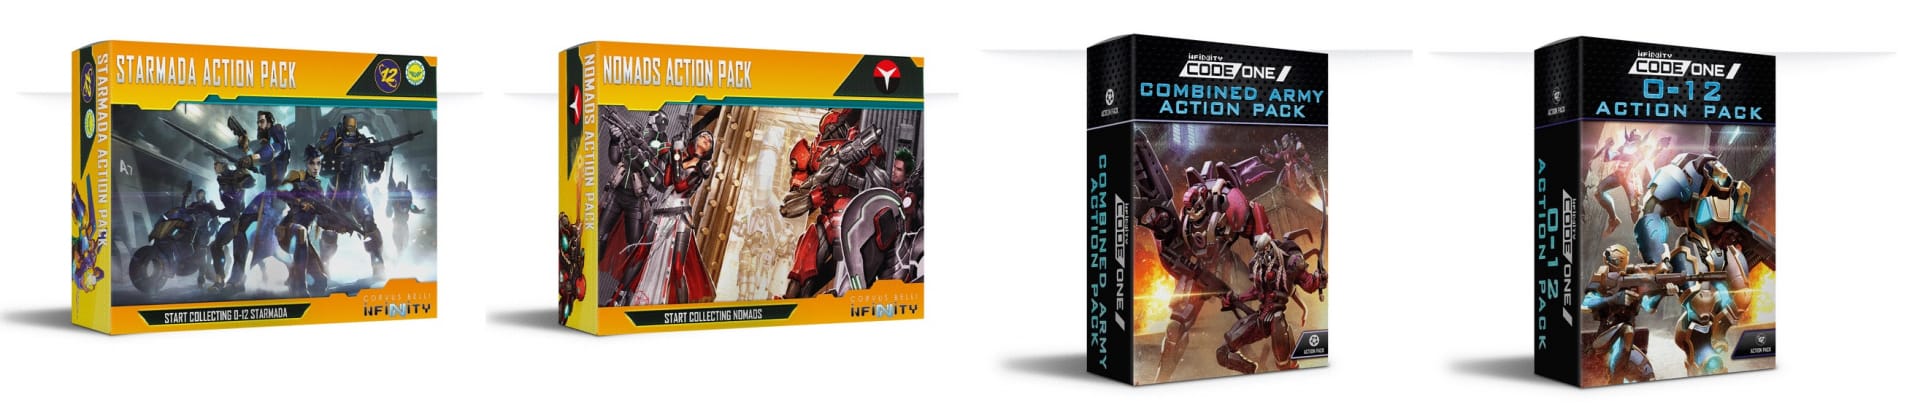 Infinity Action Packs